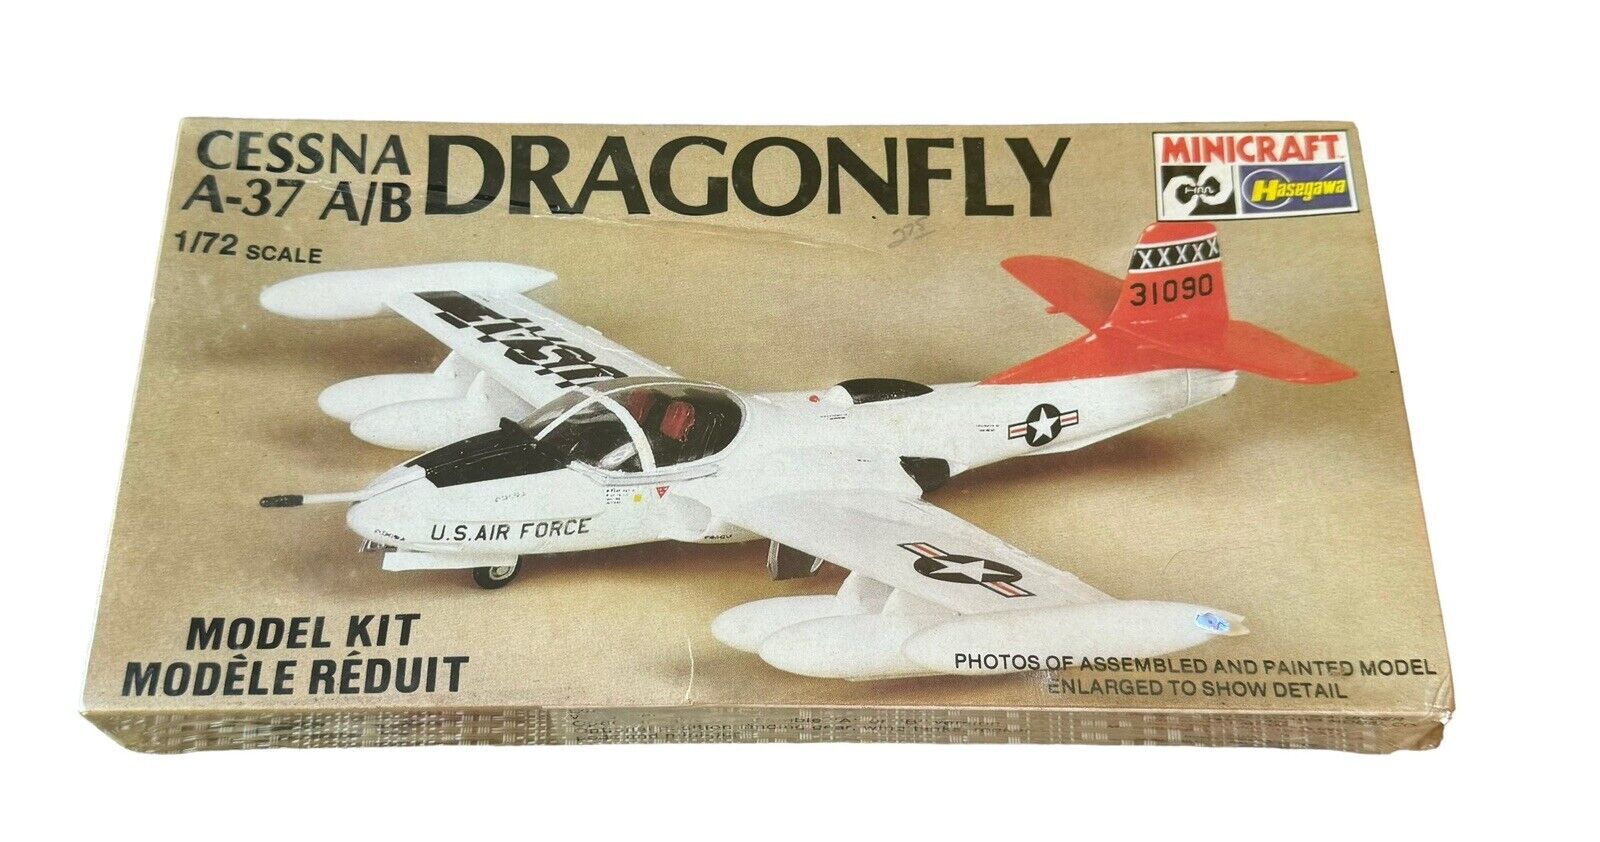 MINICRAFT #1036 CESSNA A-37 A/B DRAGONFLY 1/72 SCALE. Factory sealed